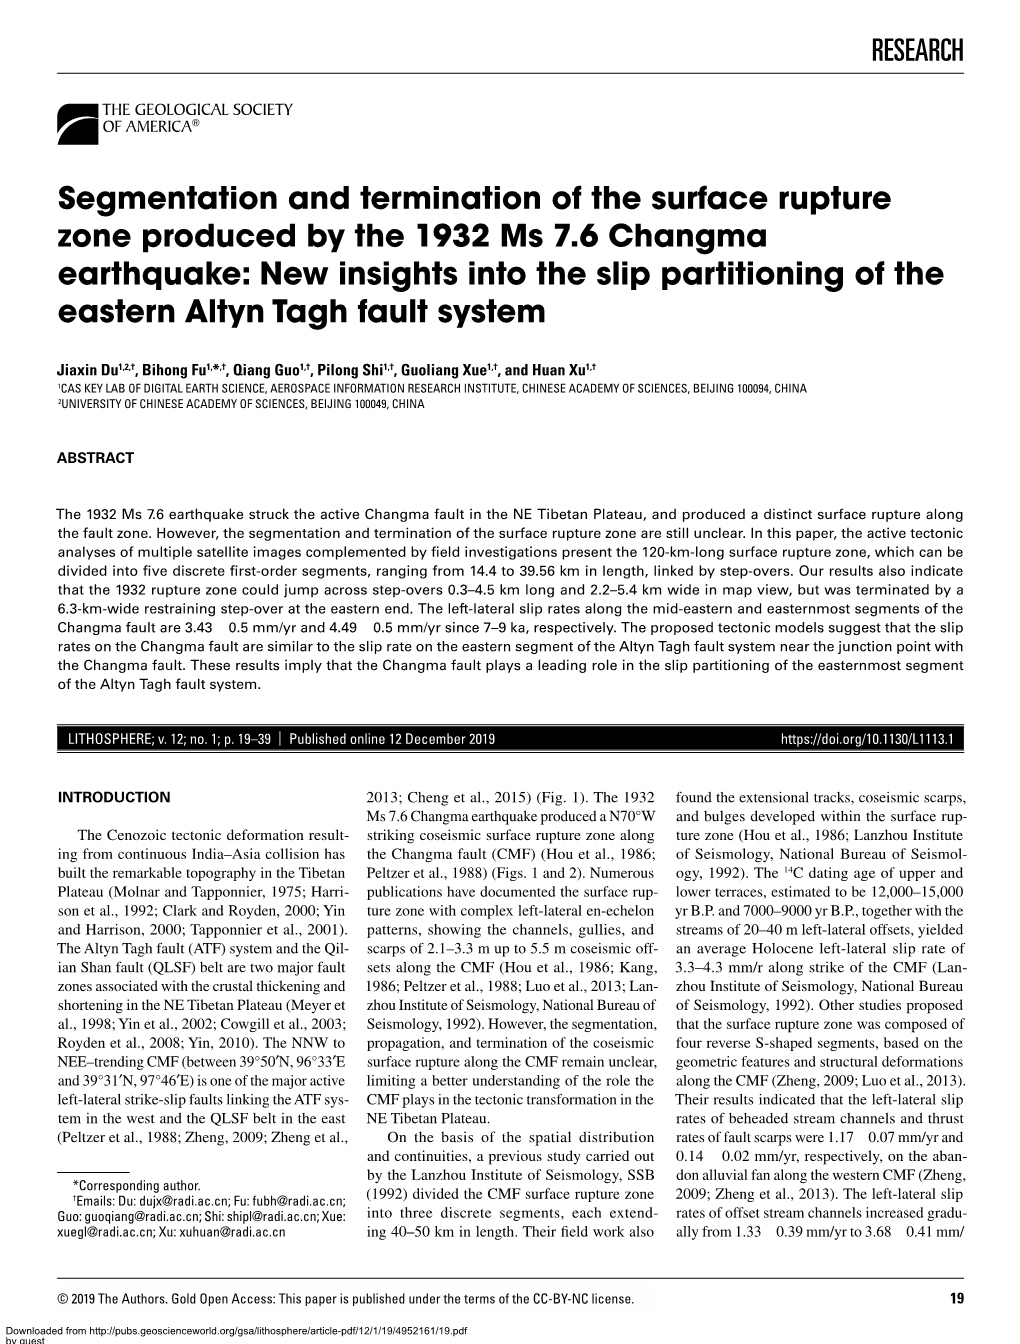 RESEARCH Segmentation and Termination of the Surface Rupture Zone Produced by the 1932 Ms 7.6 Changma Earthquake